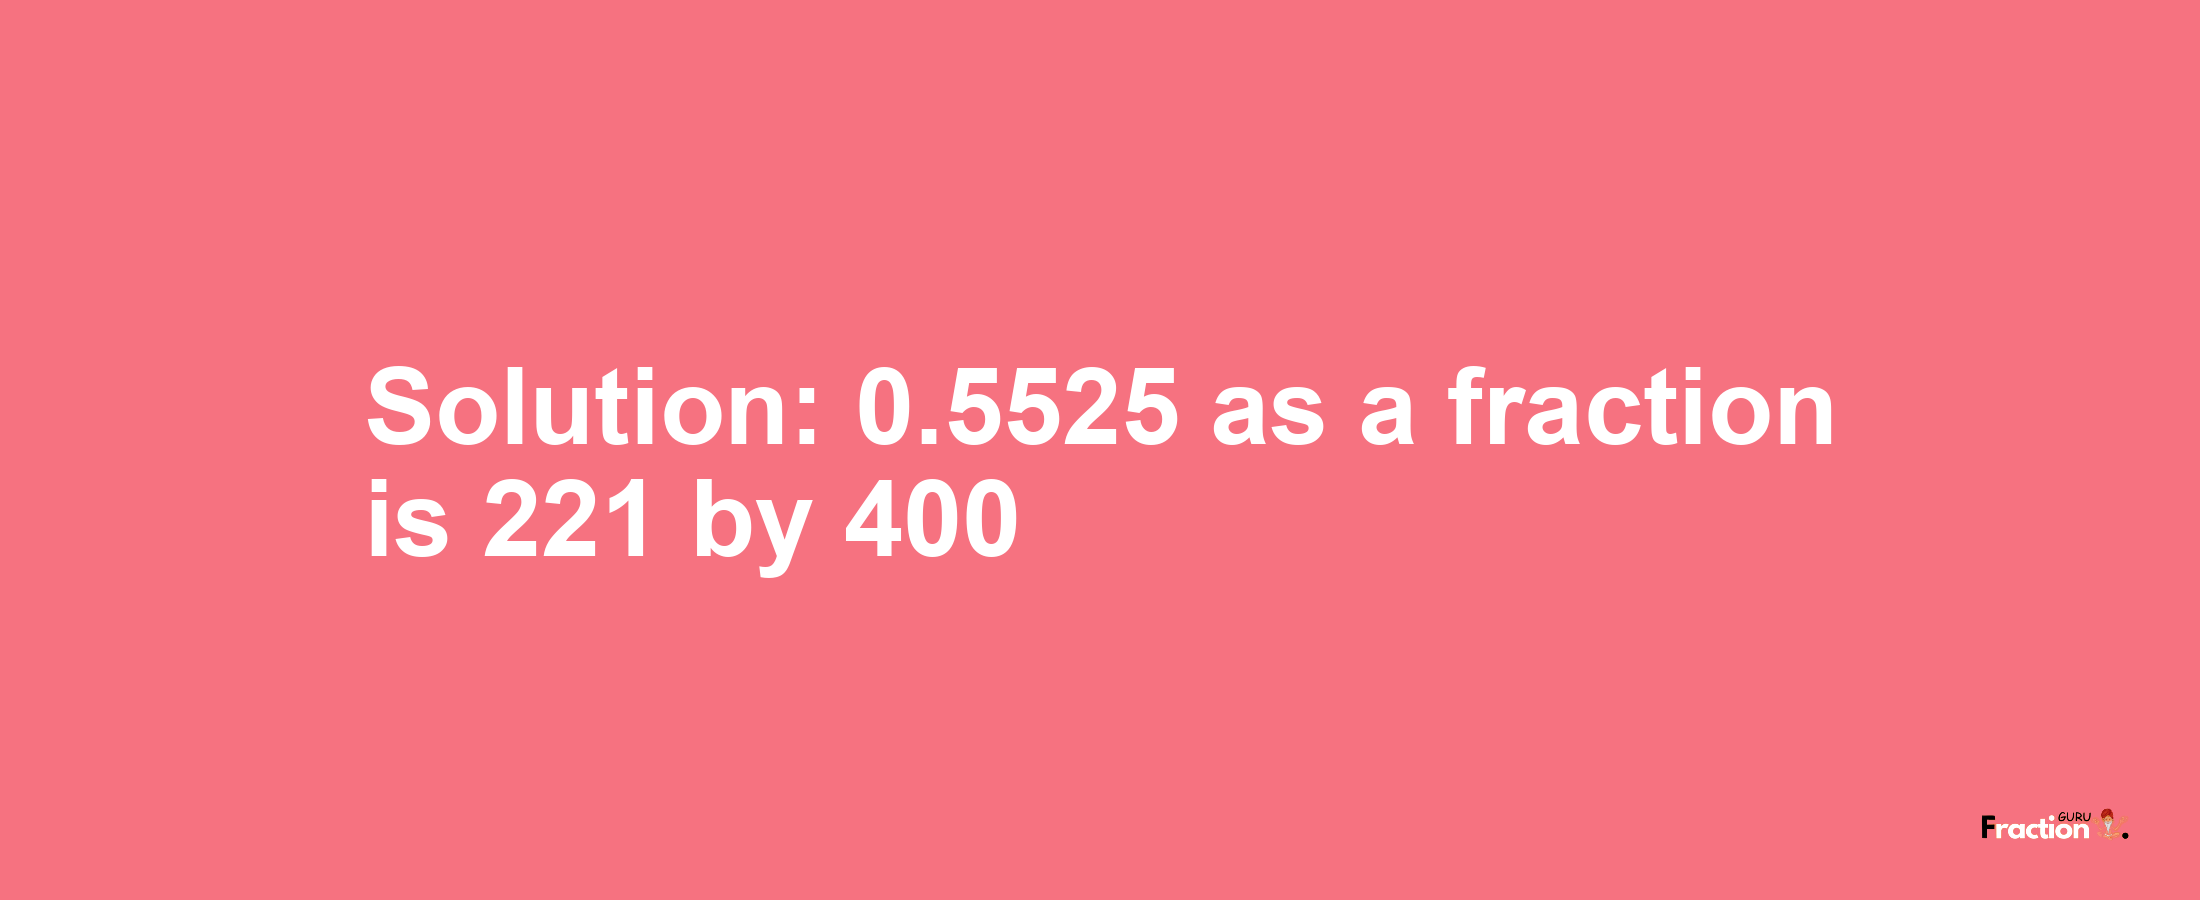 Solution:0.5525 as a fraction is 221/400